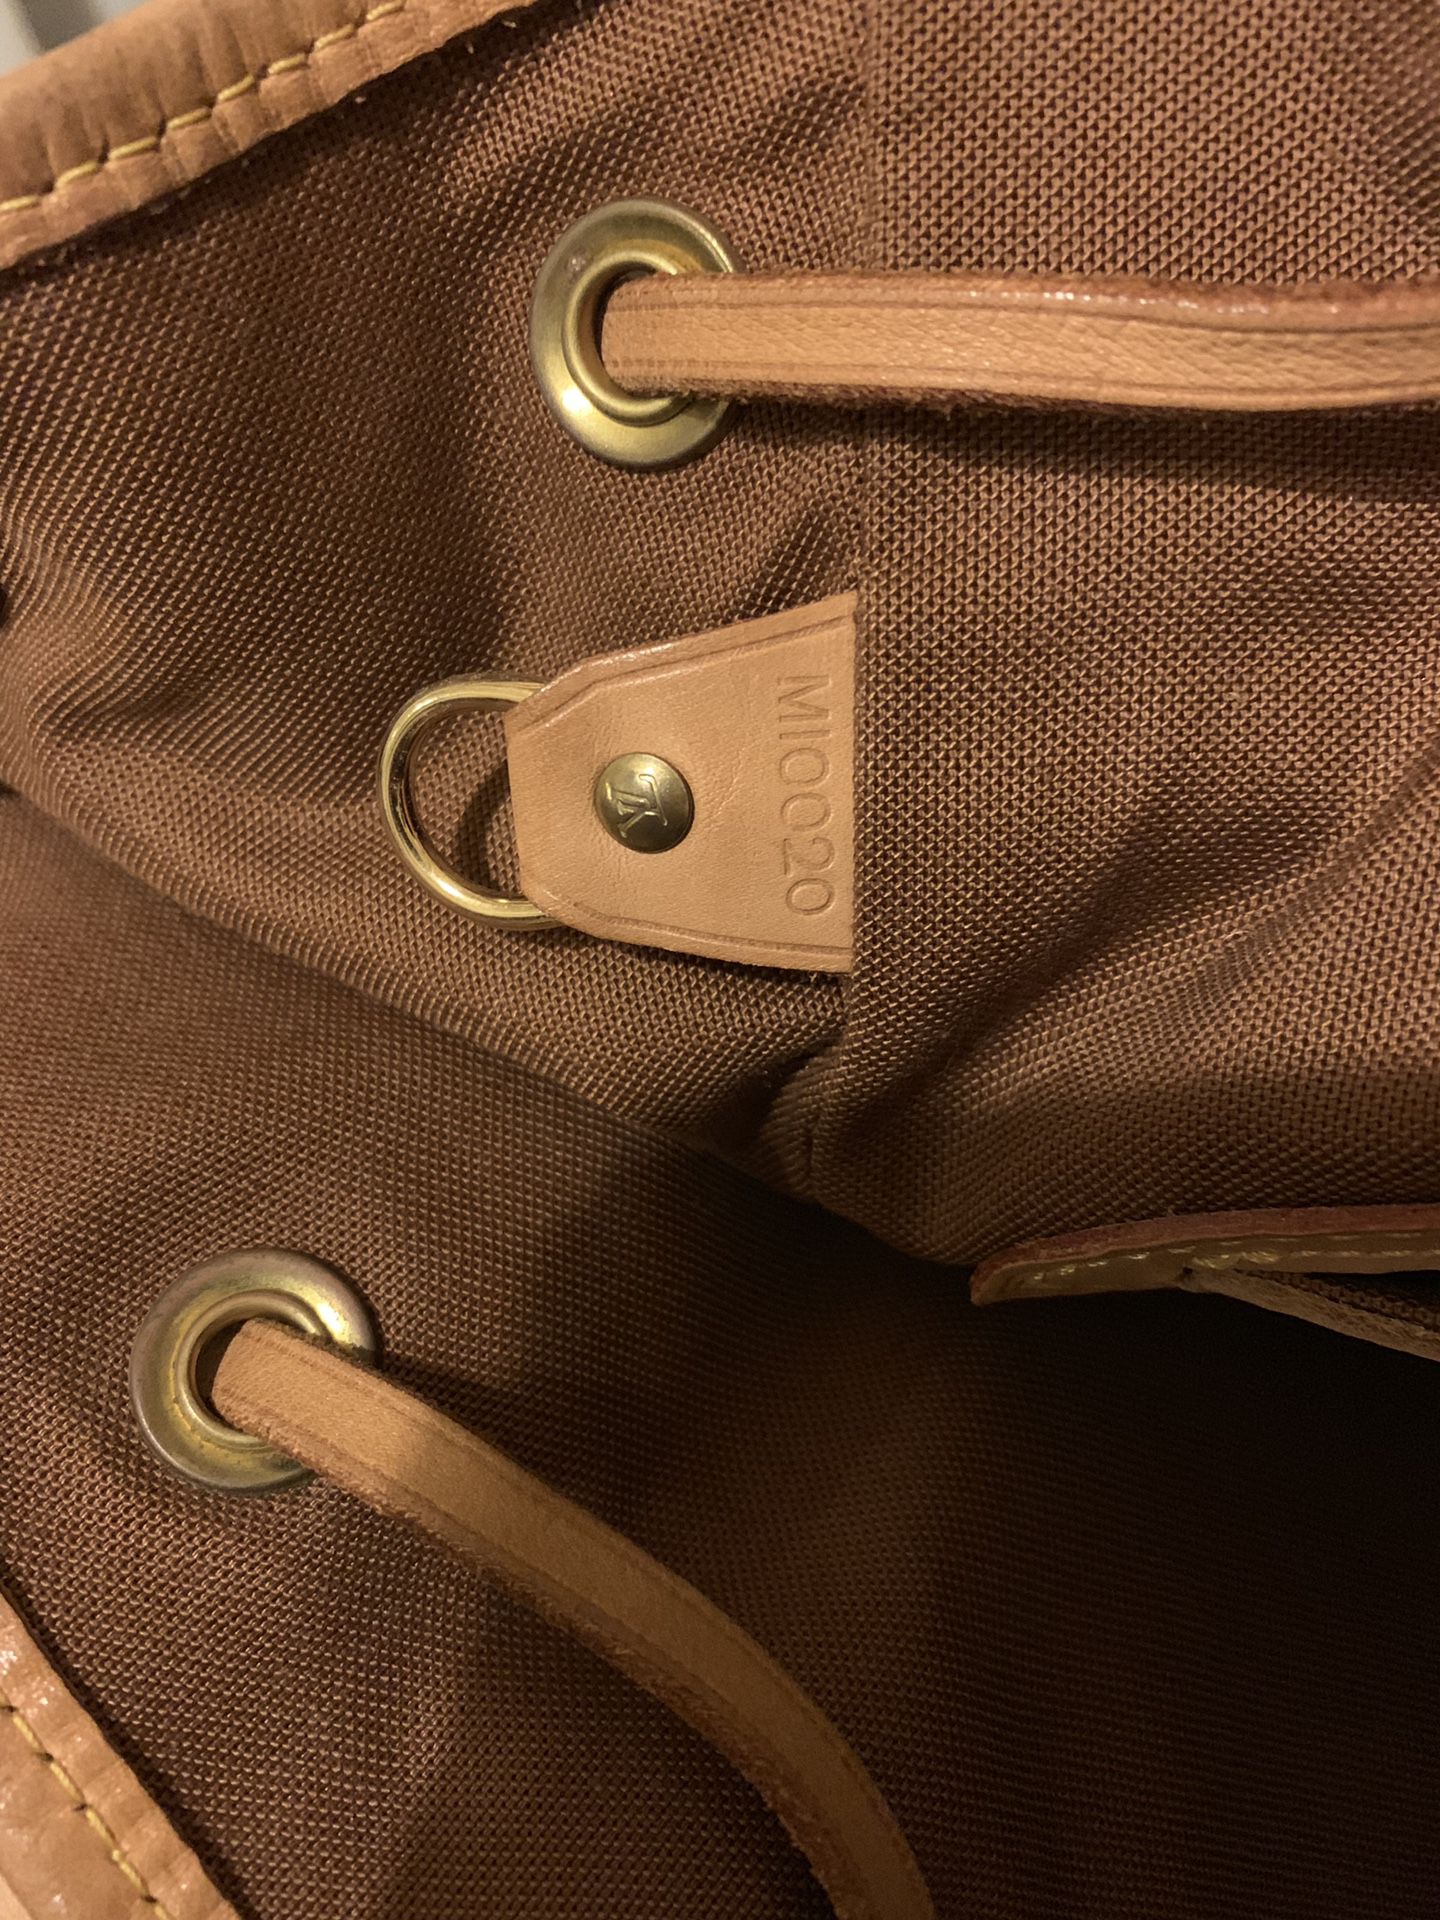 louis vuitton montsouris gm backpack for Sale in Roma, TX - OfferUp